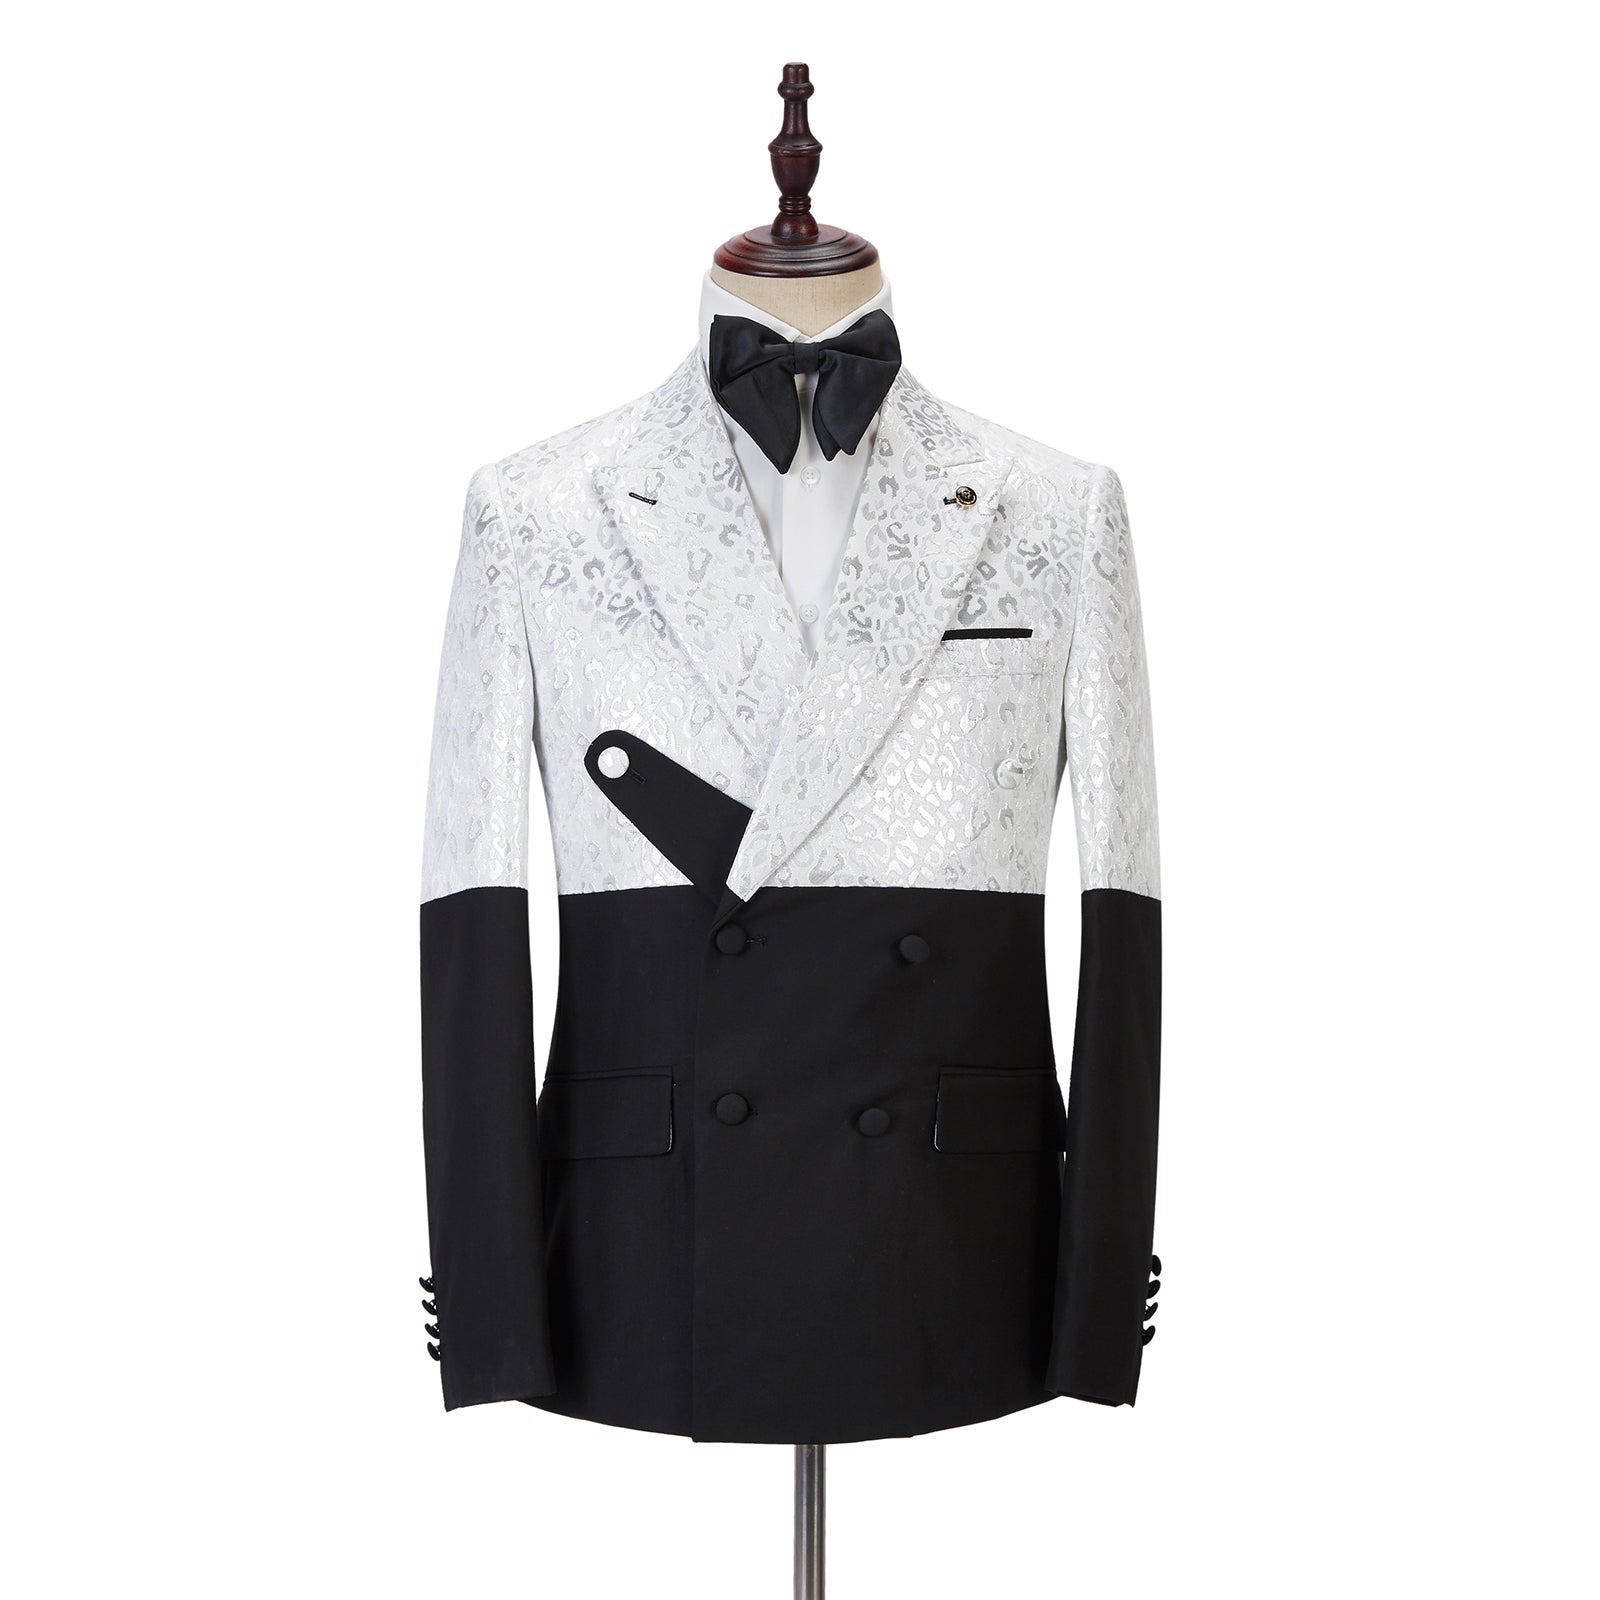 Handsome Black & White Jacquard Marriage Blazer Suit with Peaked Lapel-Prom Suits-BallBride